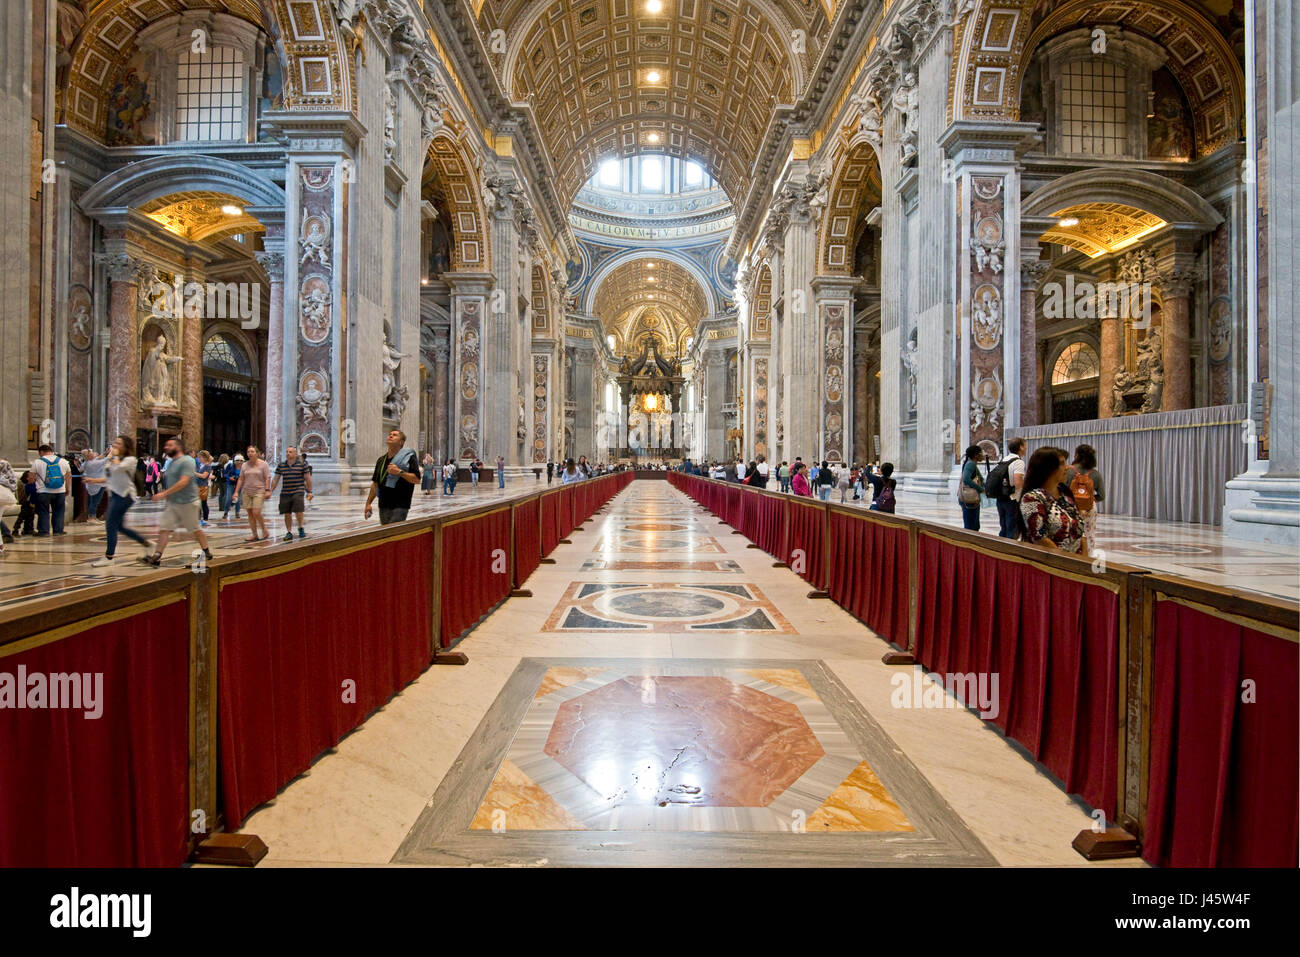 A wide angle interior view inside St Peter's Basilica with tourists walking around. Stock Photo